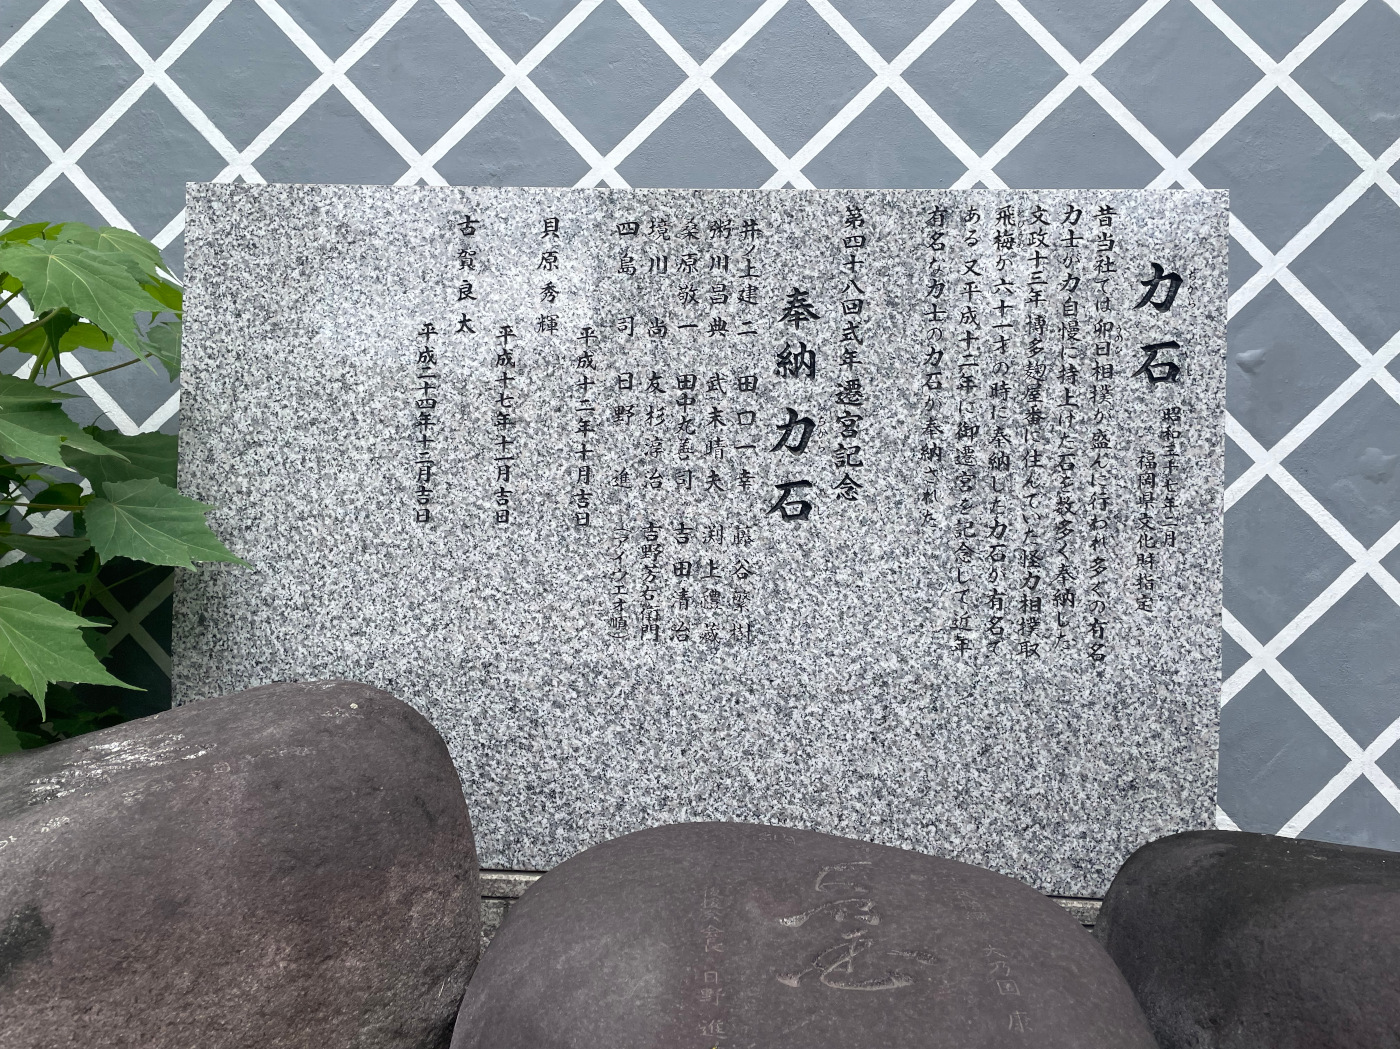 The stone sign next to the power stone display. It provides some information about the stones (in Japanese).